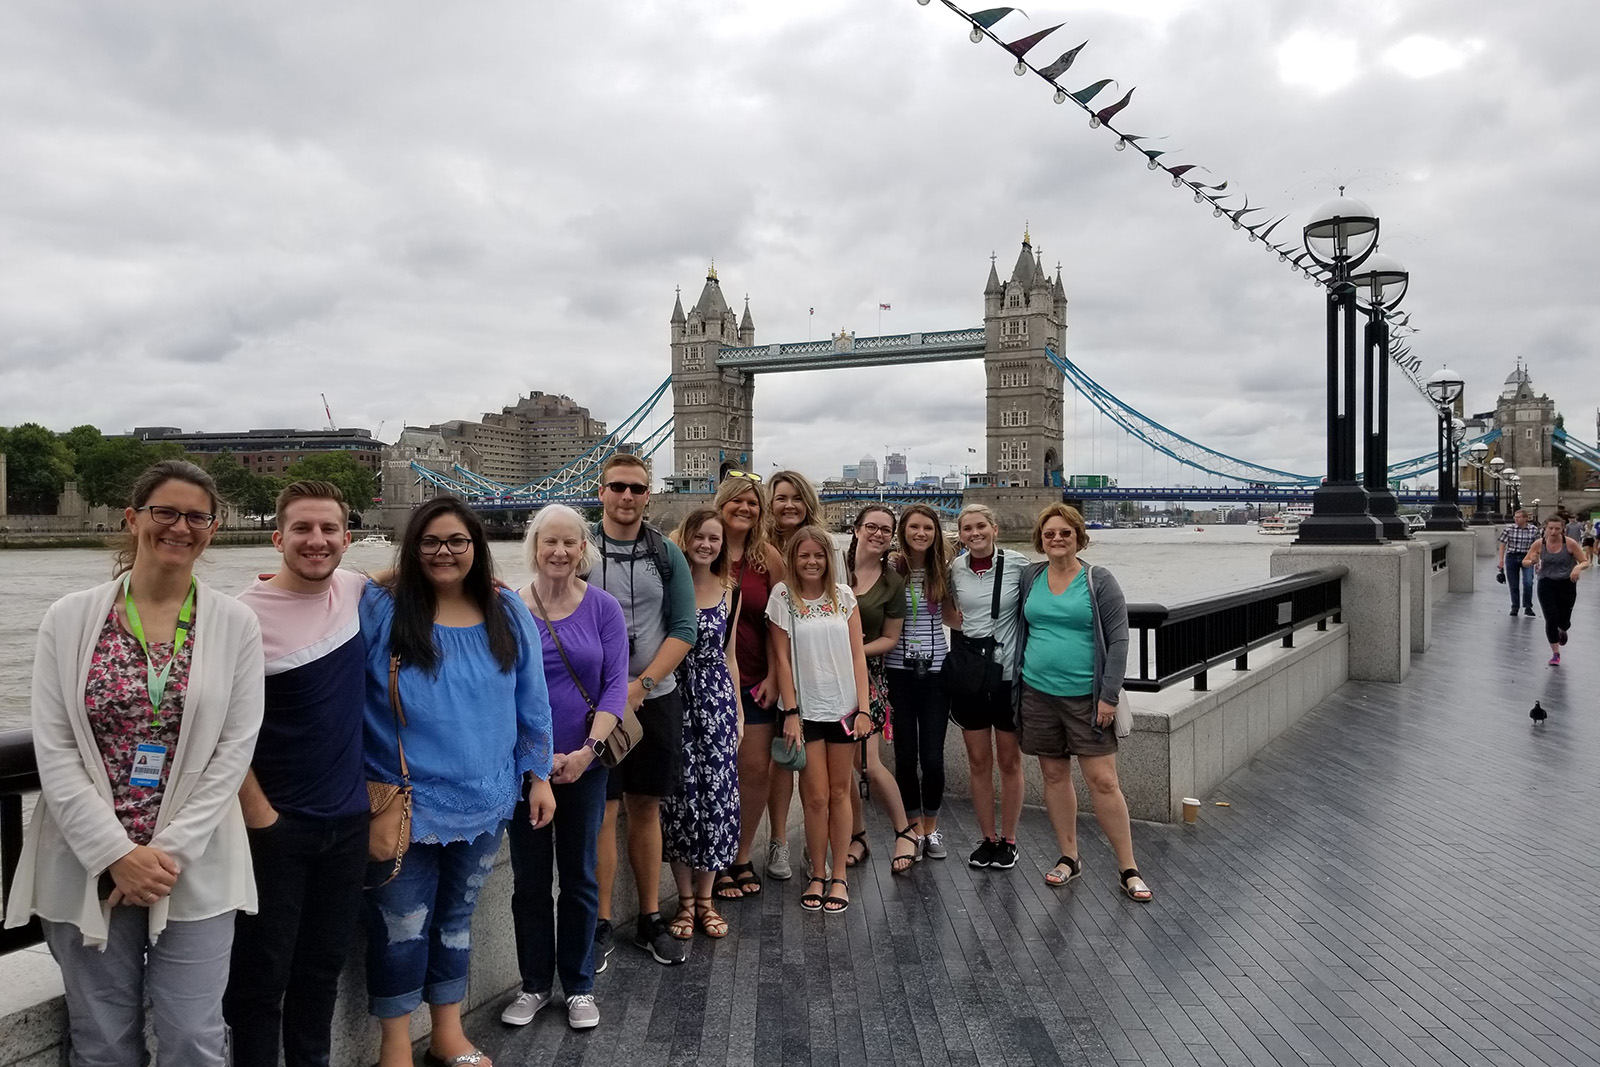 Students and faculty pause for a photo in front of the London Bridge